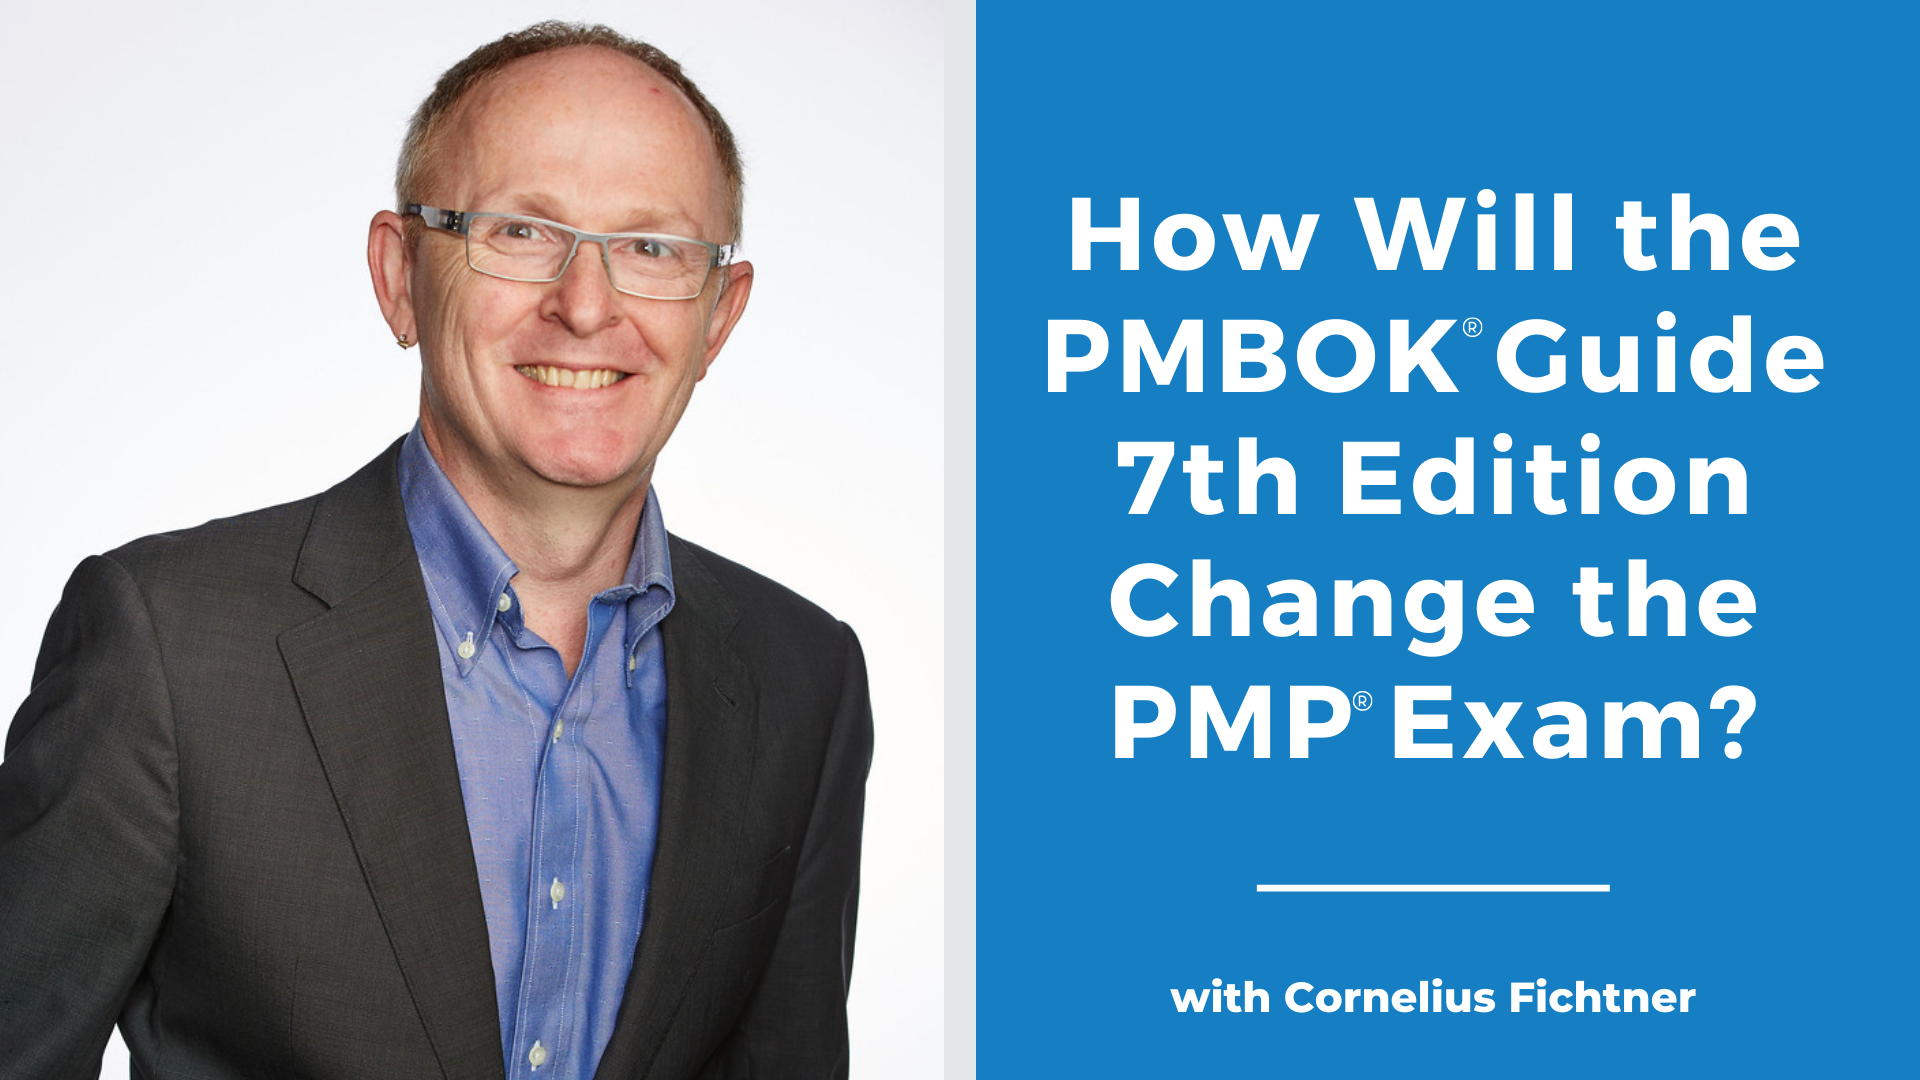 How Will the PMBOK® Guide 7th Edition Change the PMP® Exam?